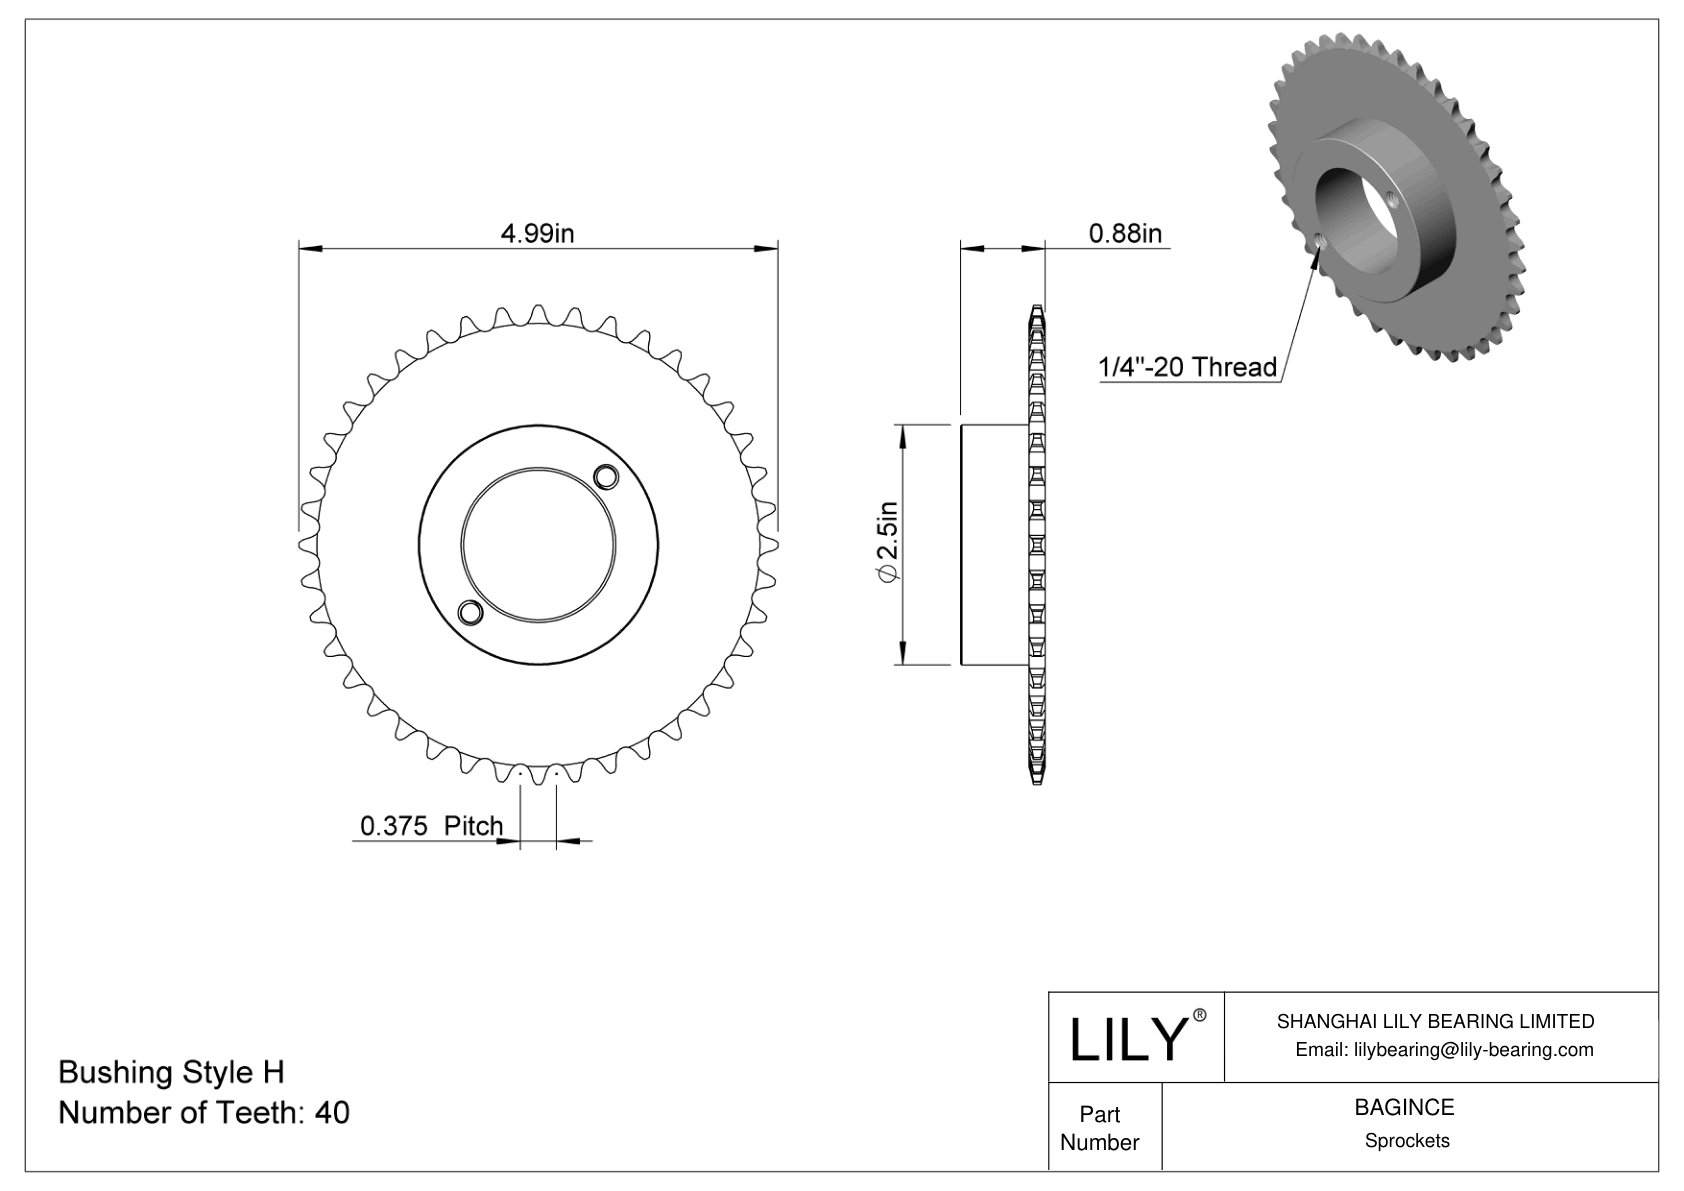 BAGINCE Split-Tapered Bushing-Bore Sprockets for ANSI Roller Chain cad drawing